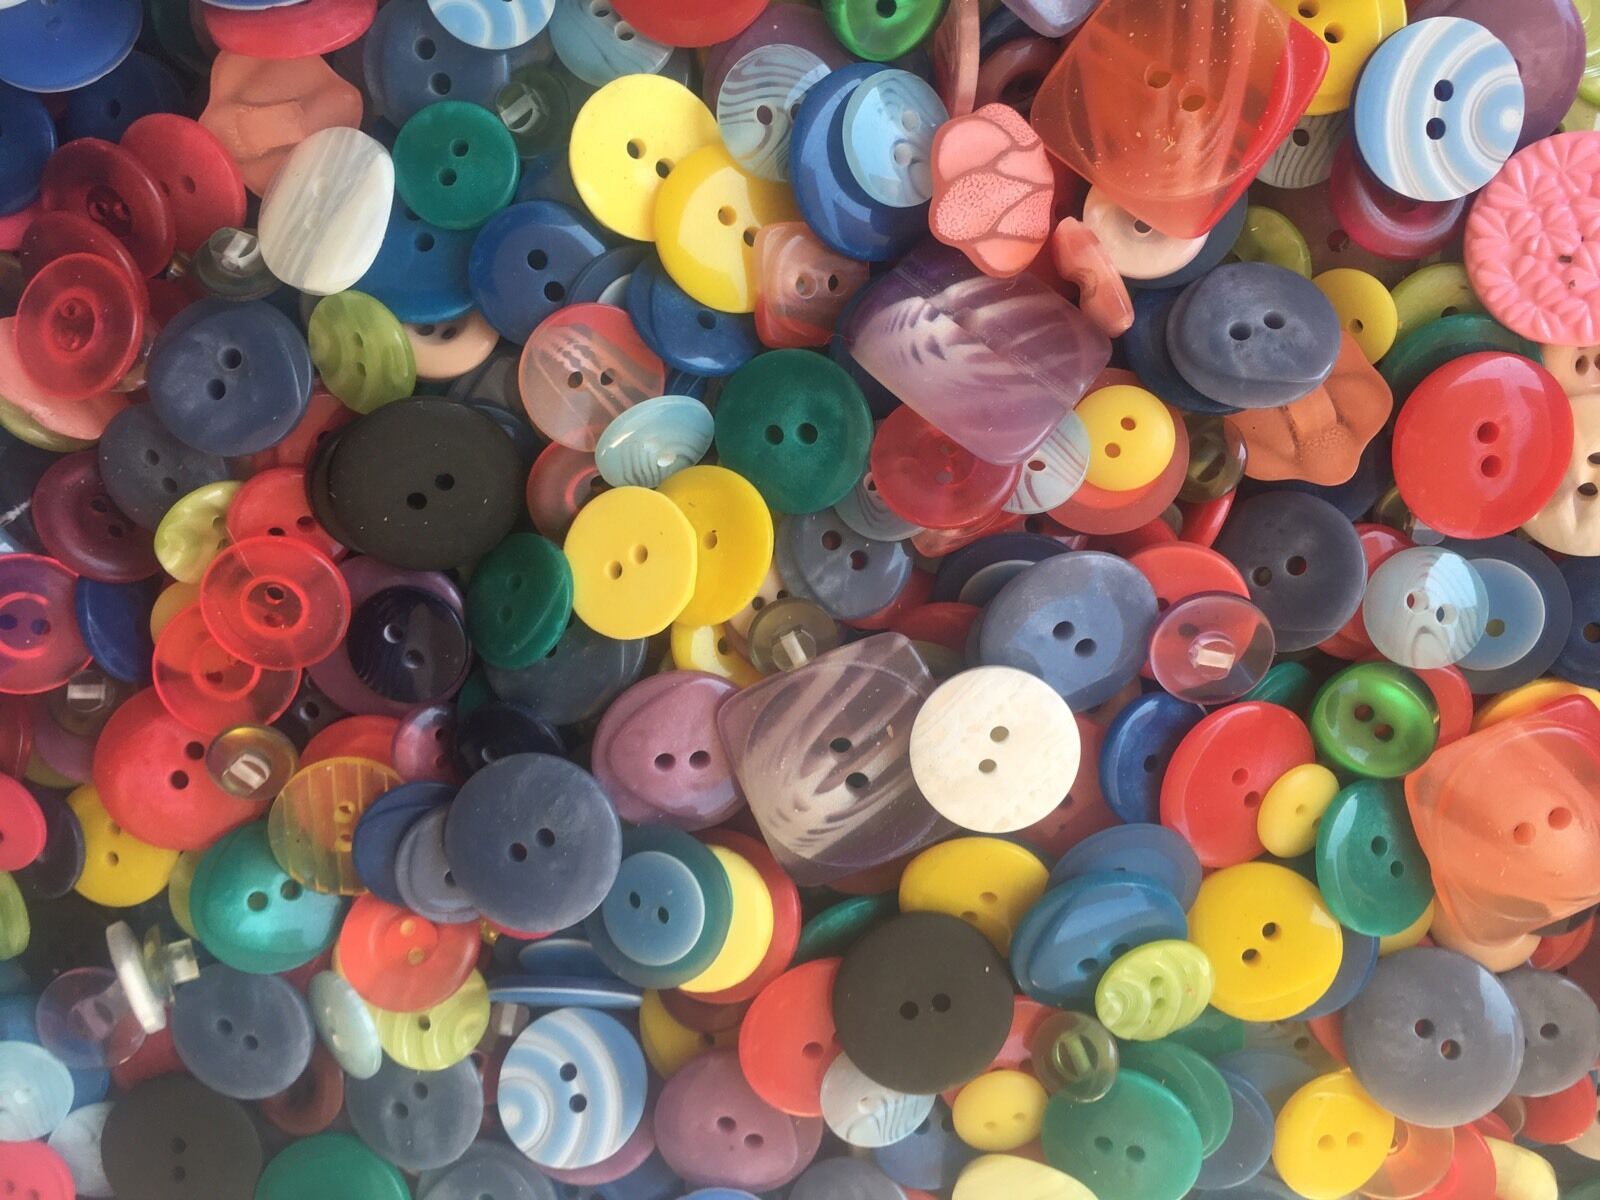 50 pc Mixed Lot Of All Types & Sizes Of Fun Colorful Buttons